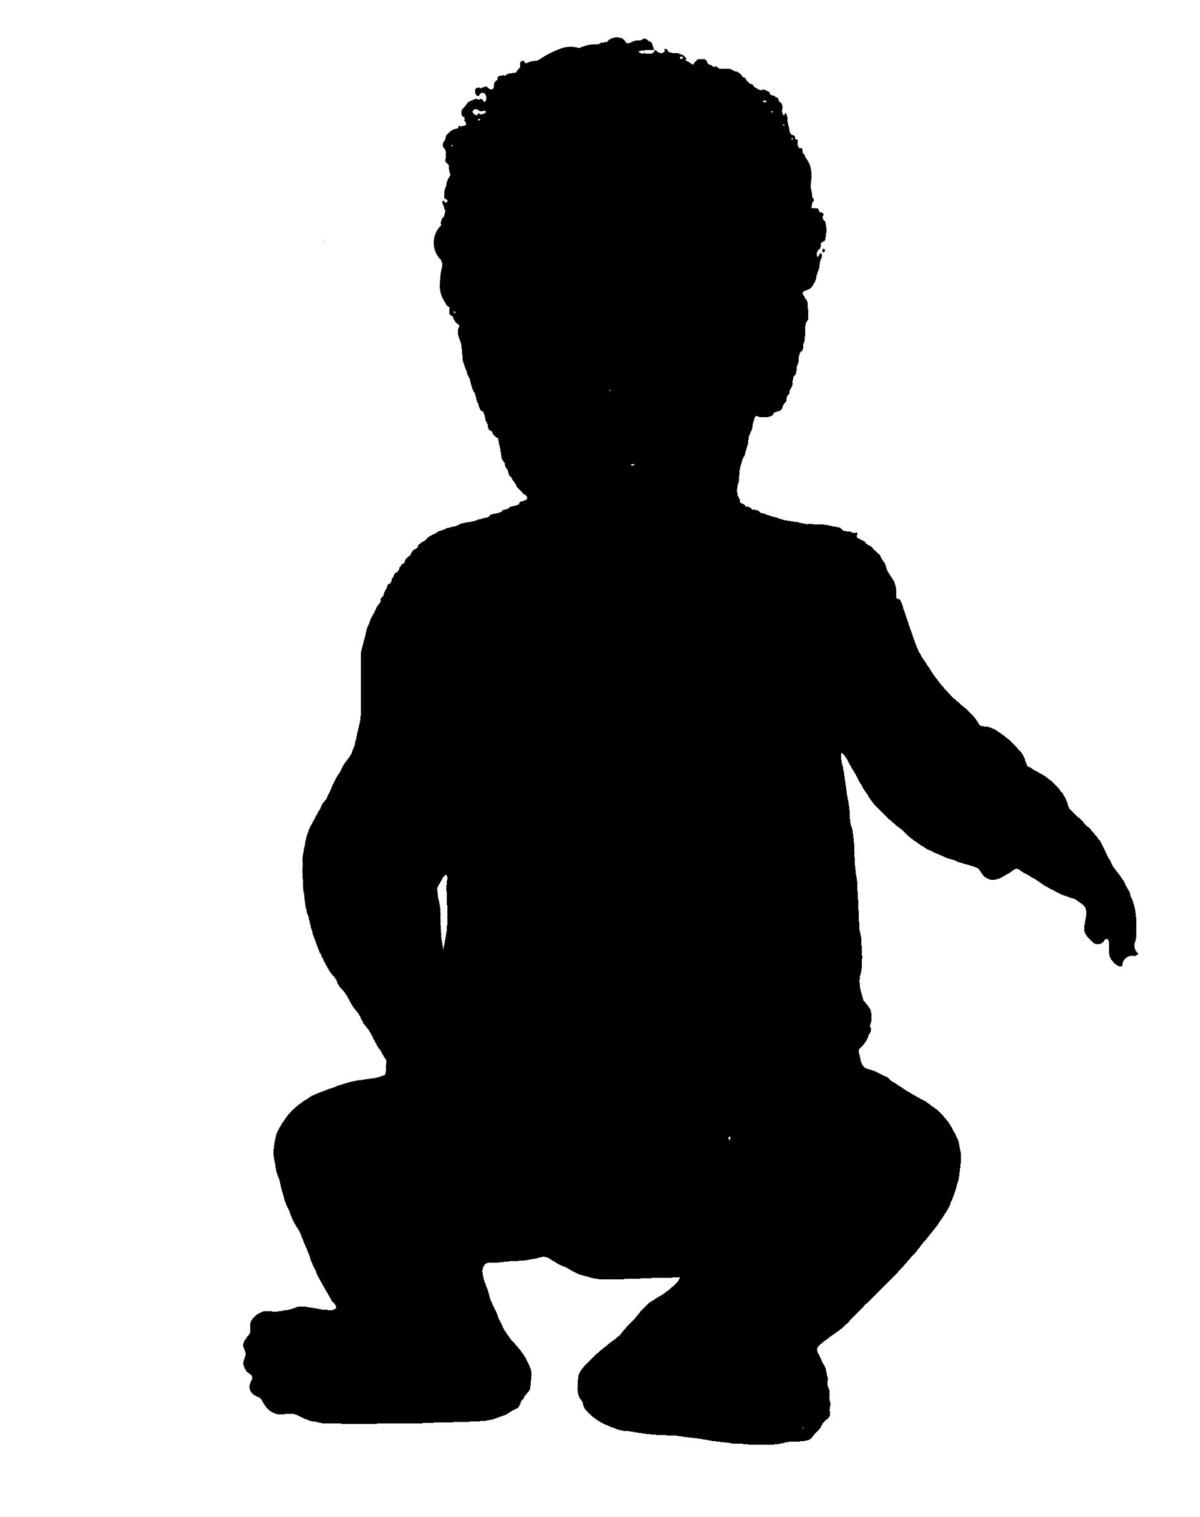 A silhouette of a seated baby